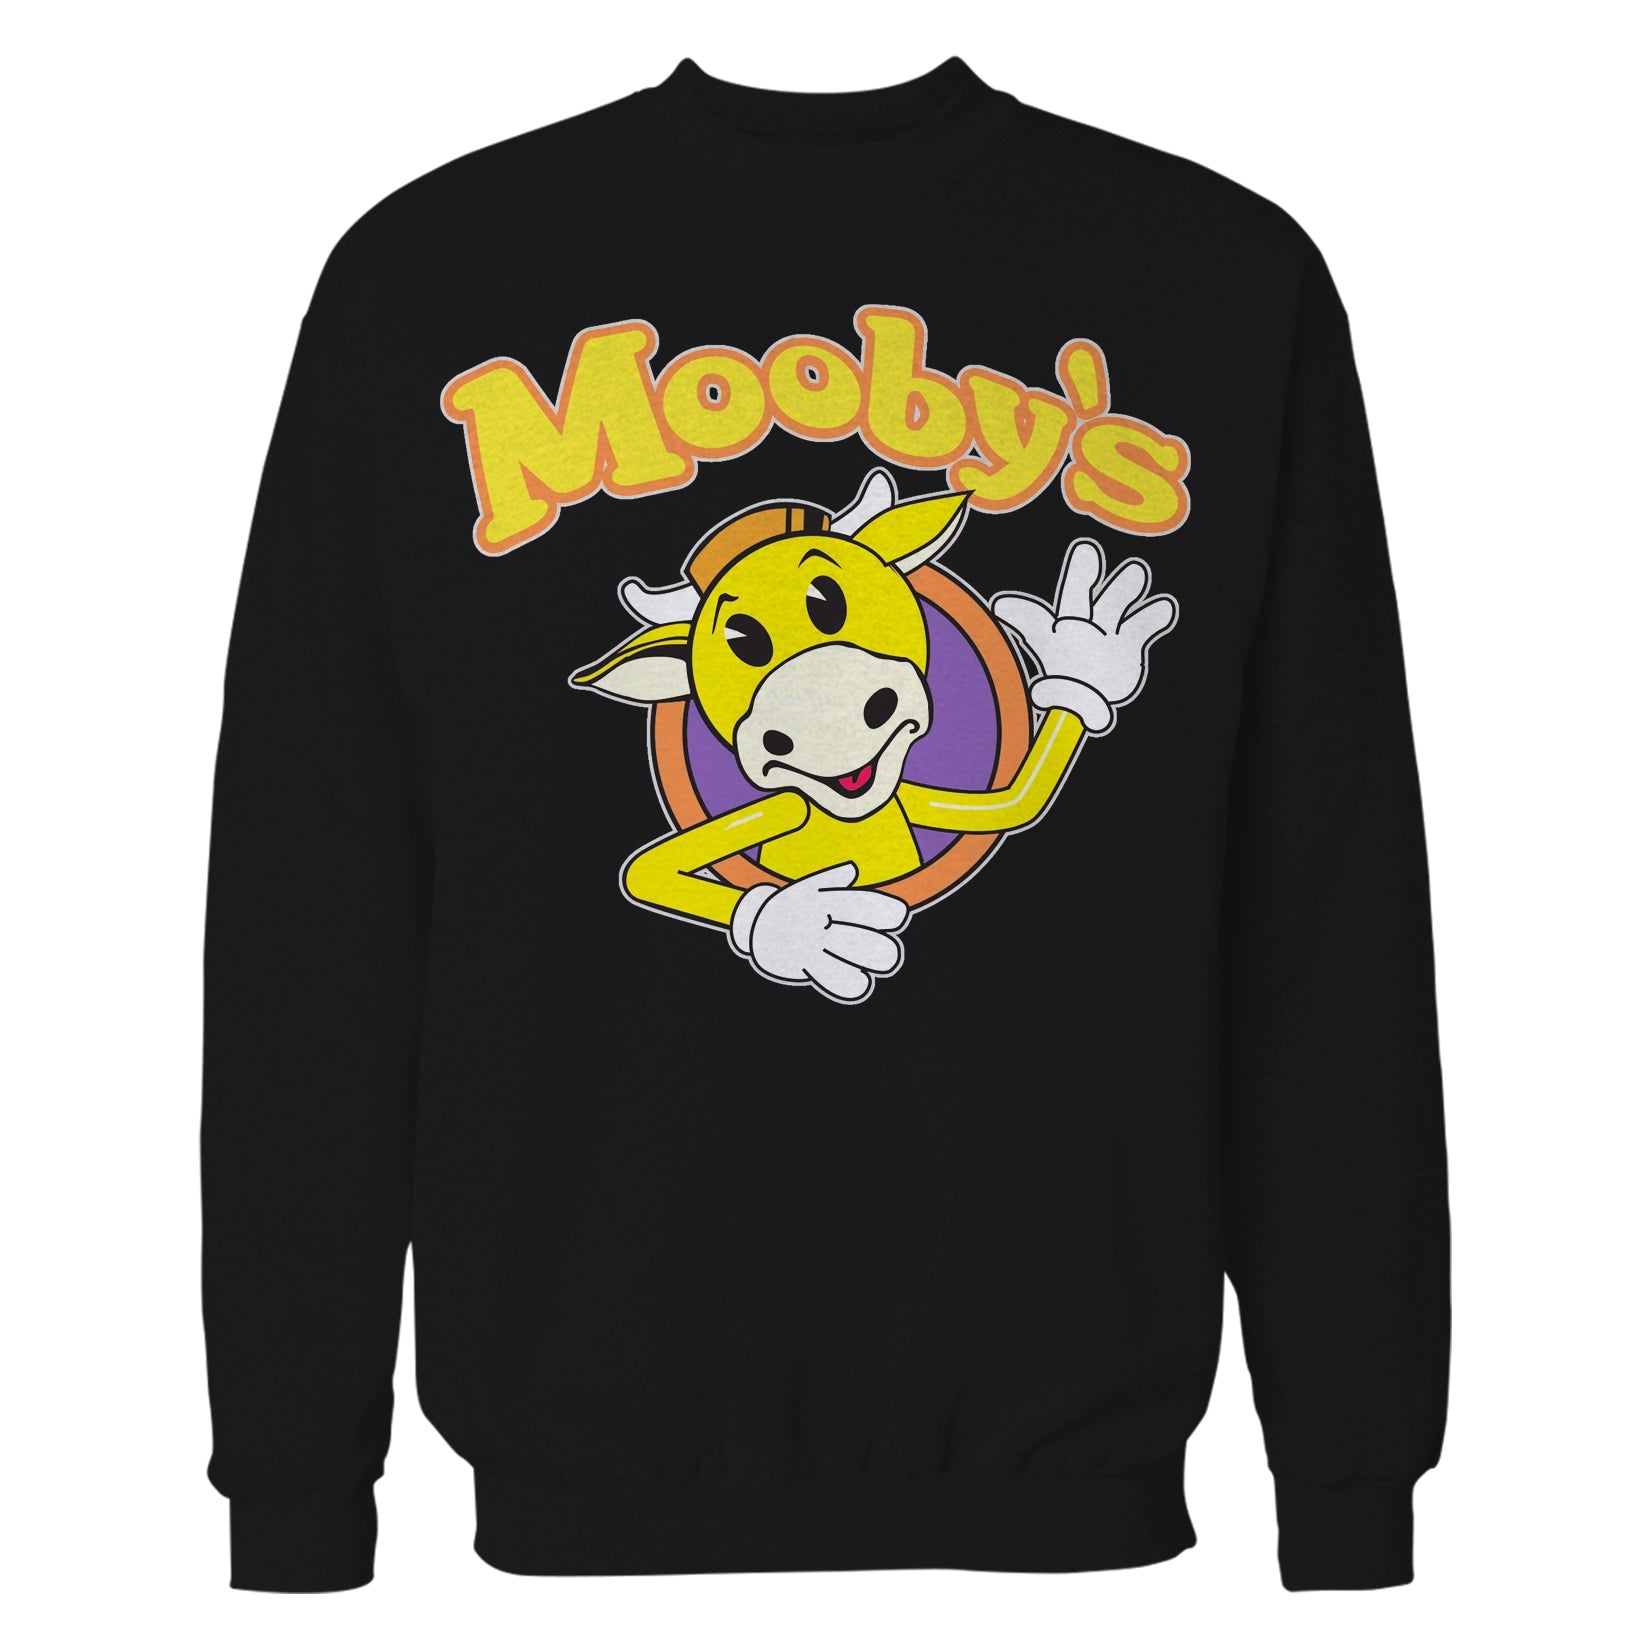 Kevin Smith View Askewniverse Mooby's Logo Official Sweatshirt